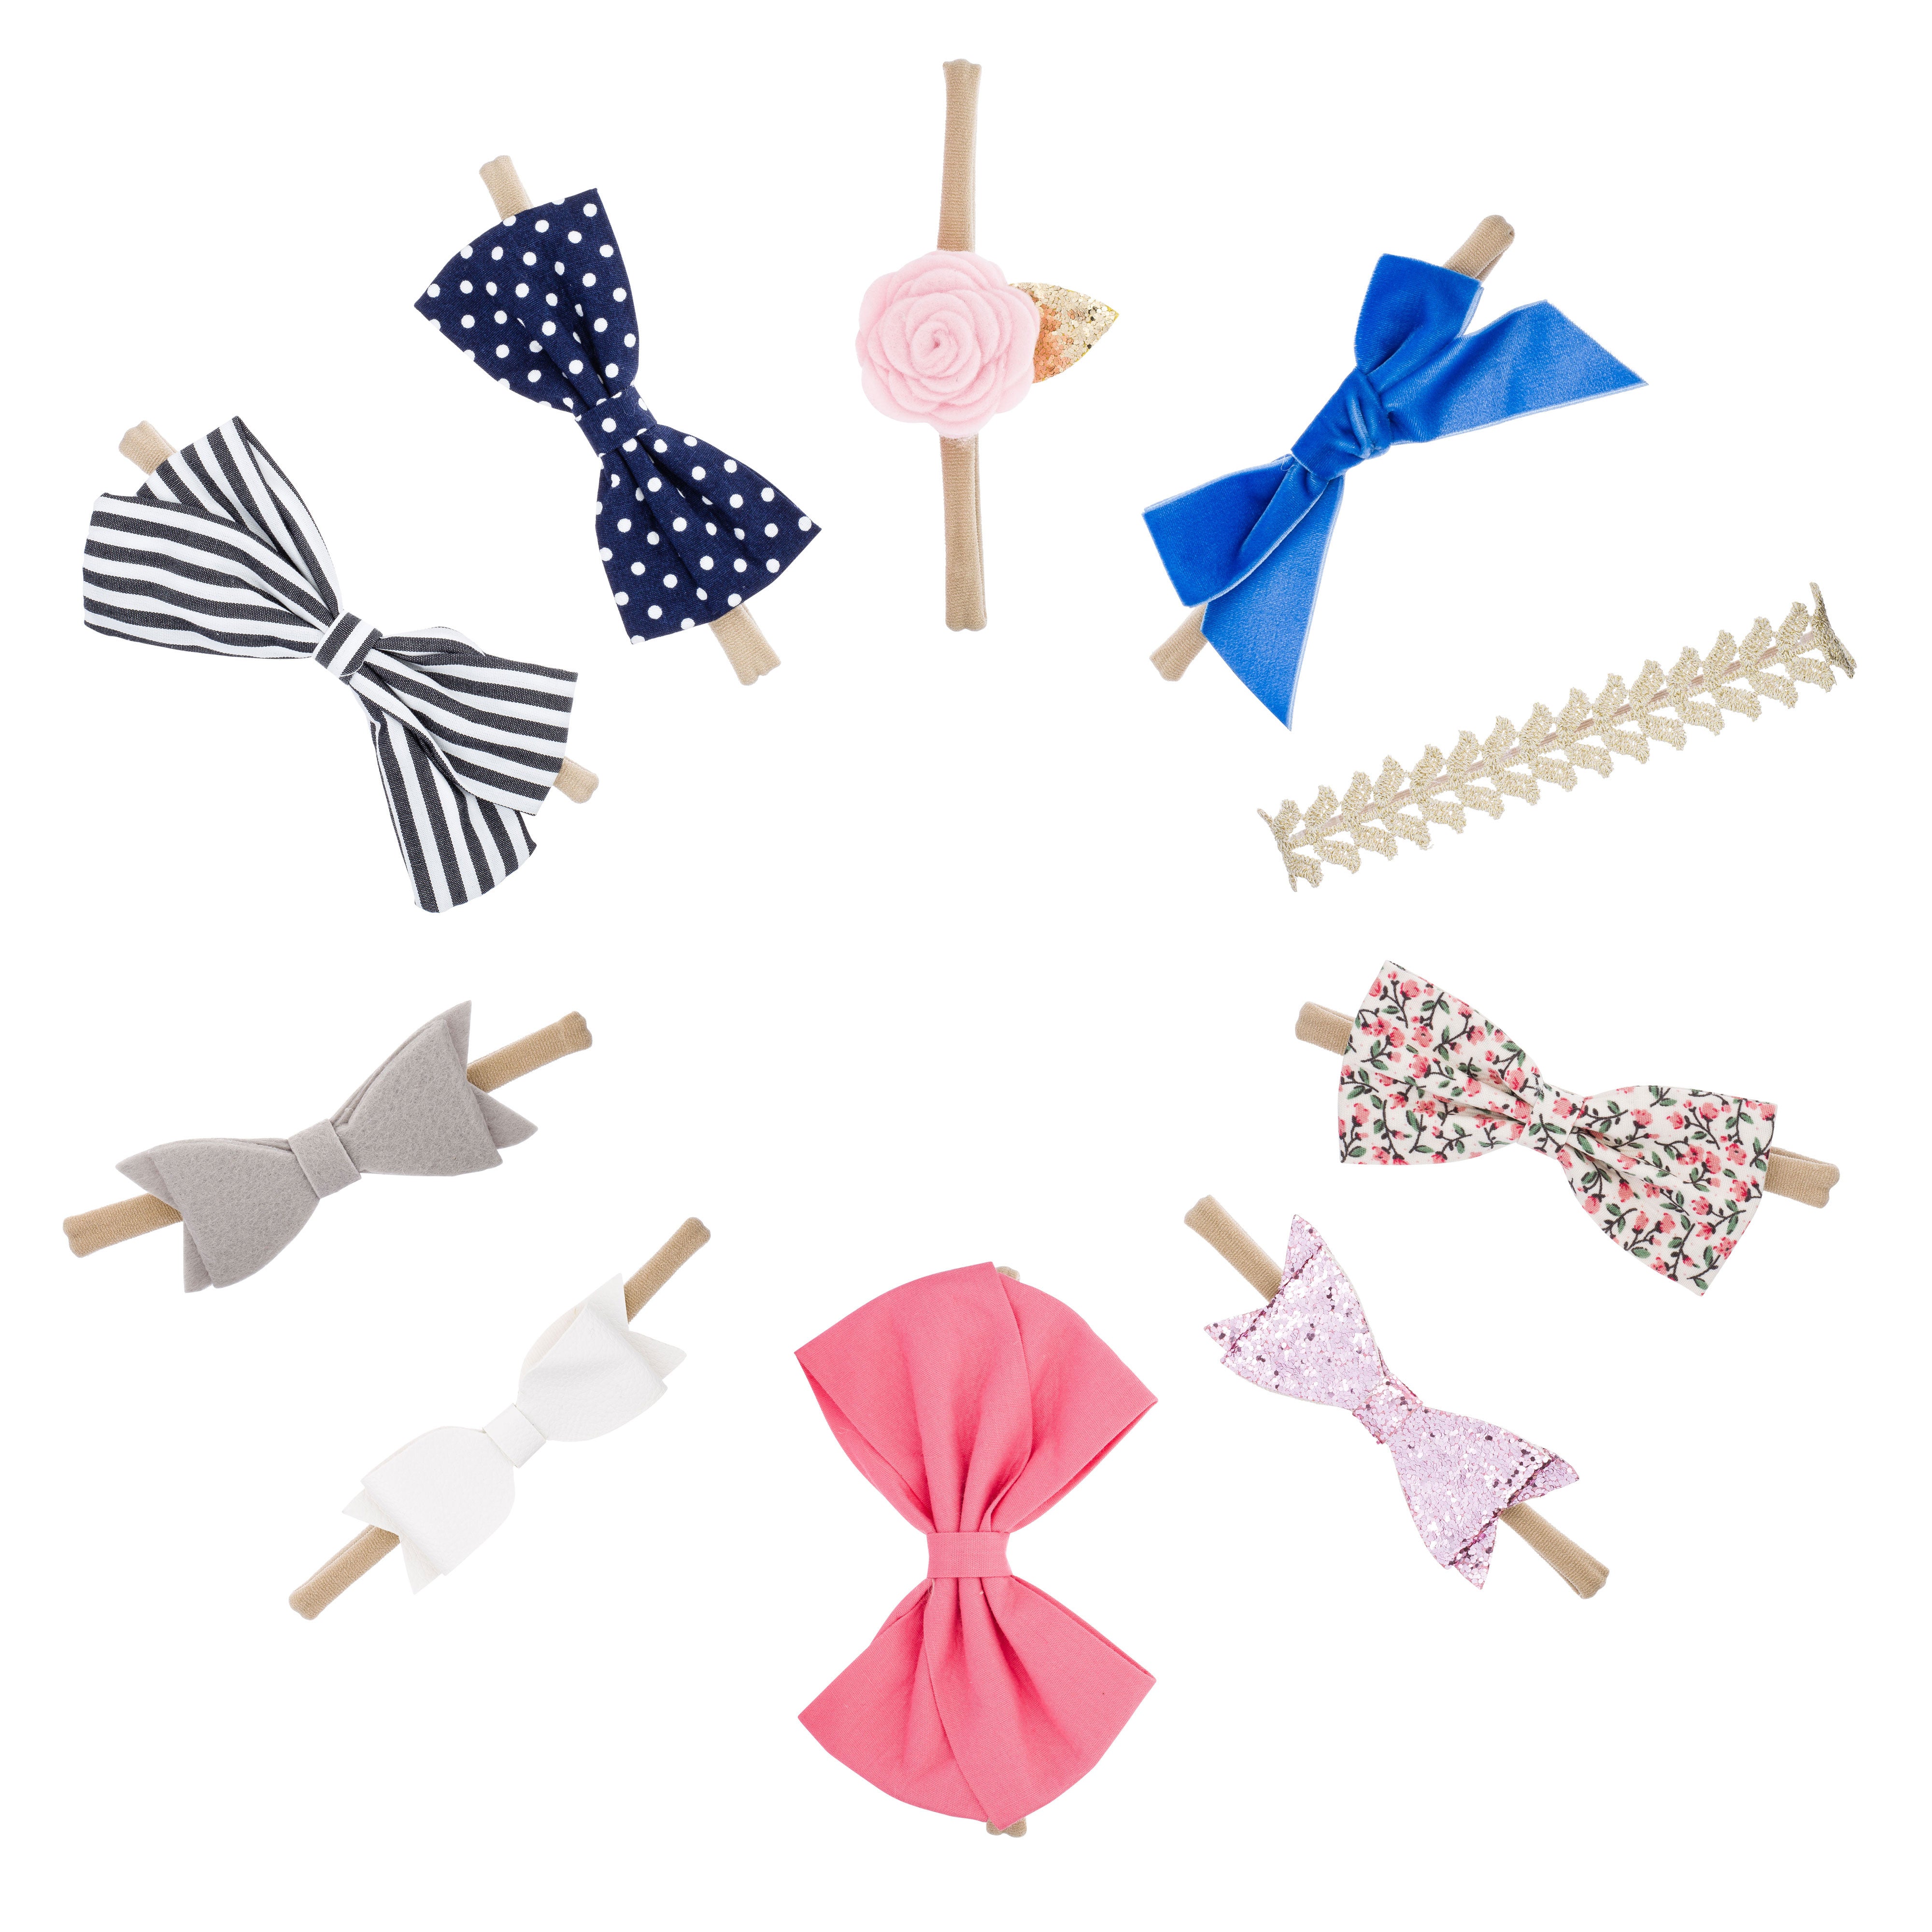 The Essentials Bows and Headbands Set: set of 10 hair bows for baby.